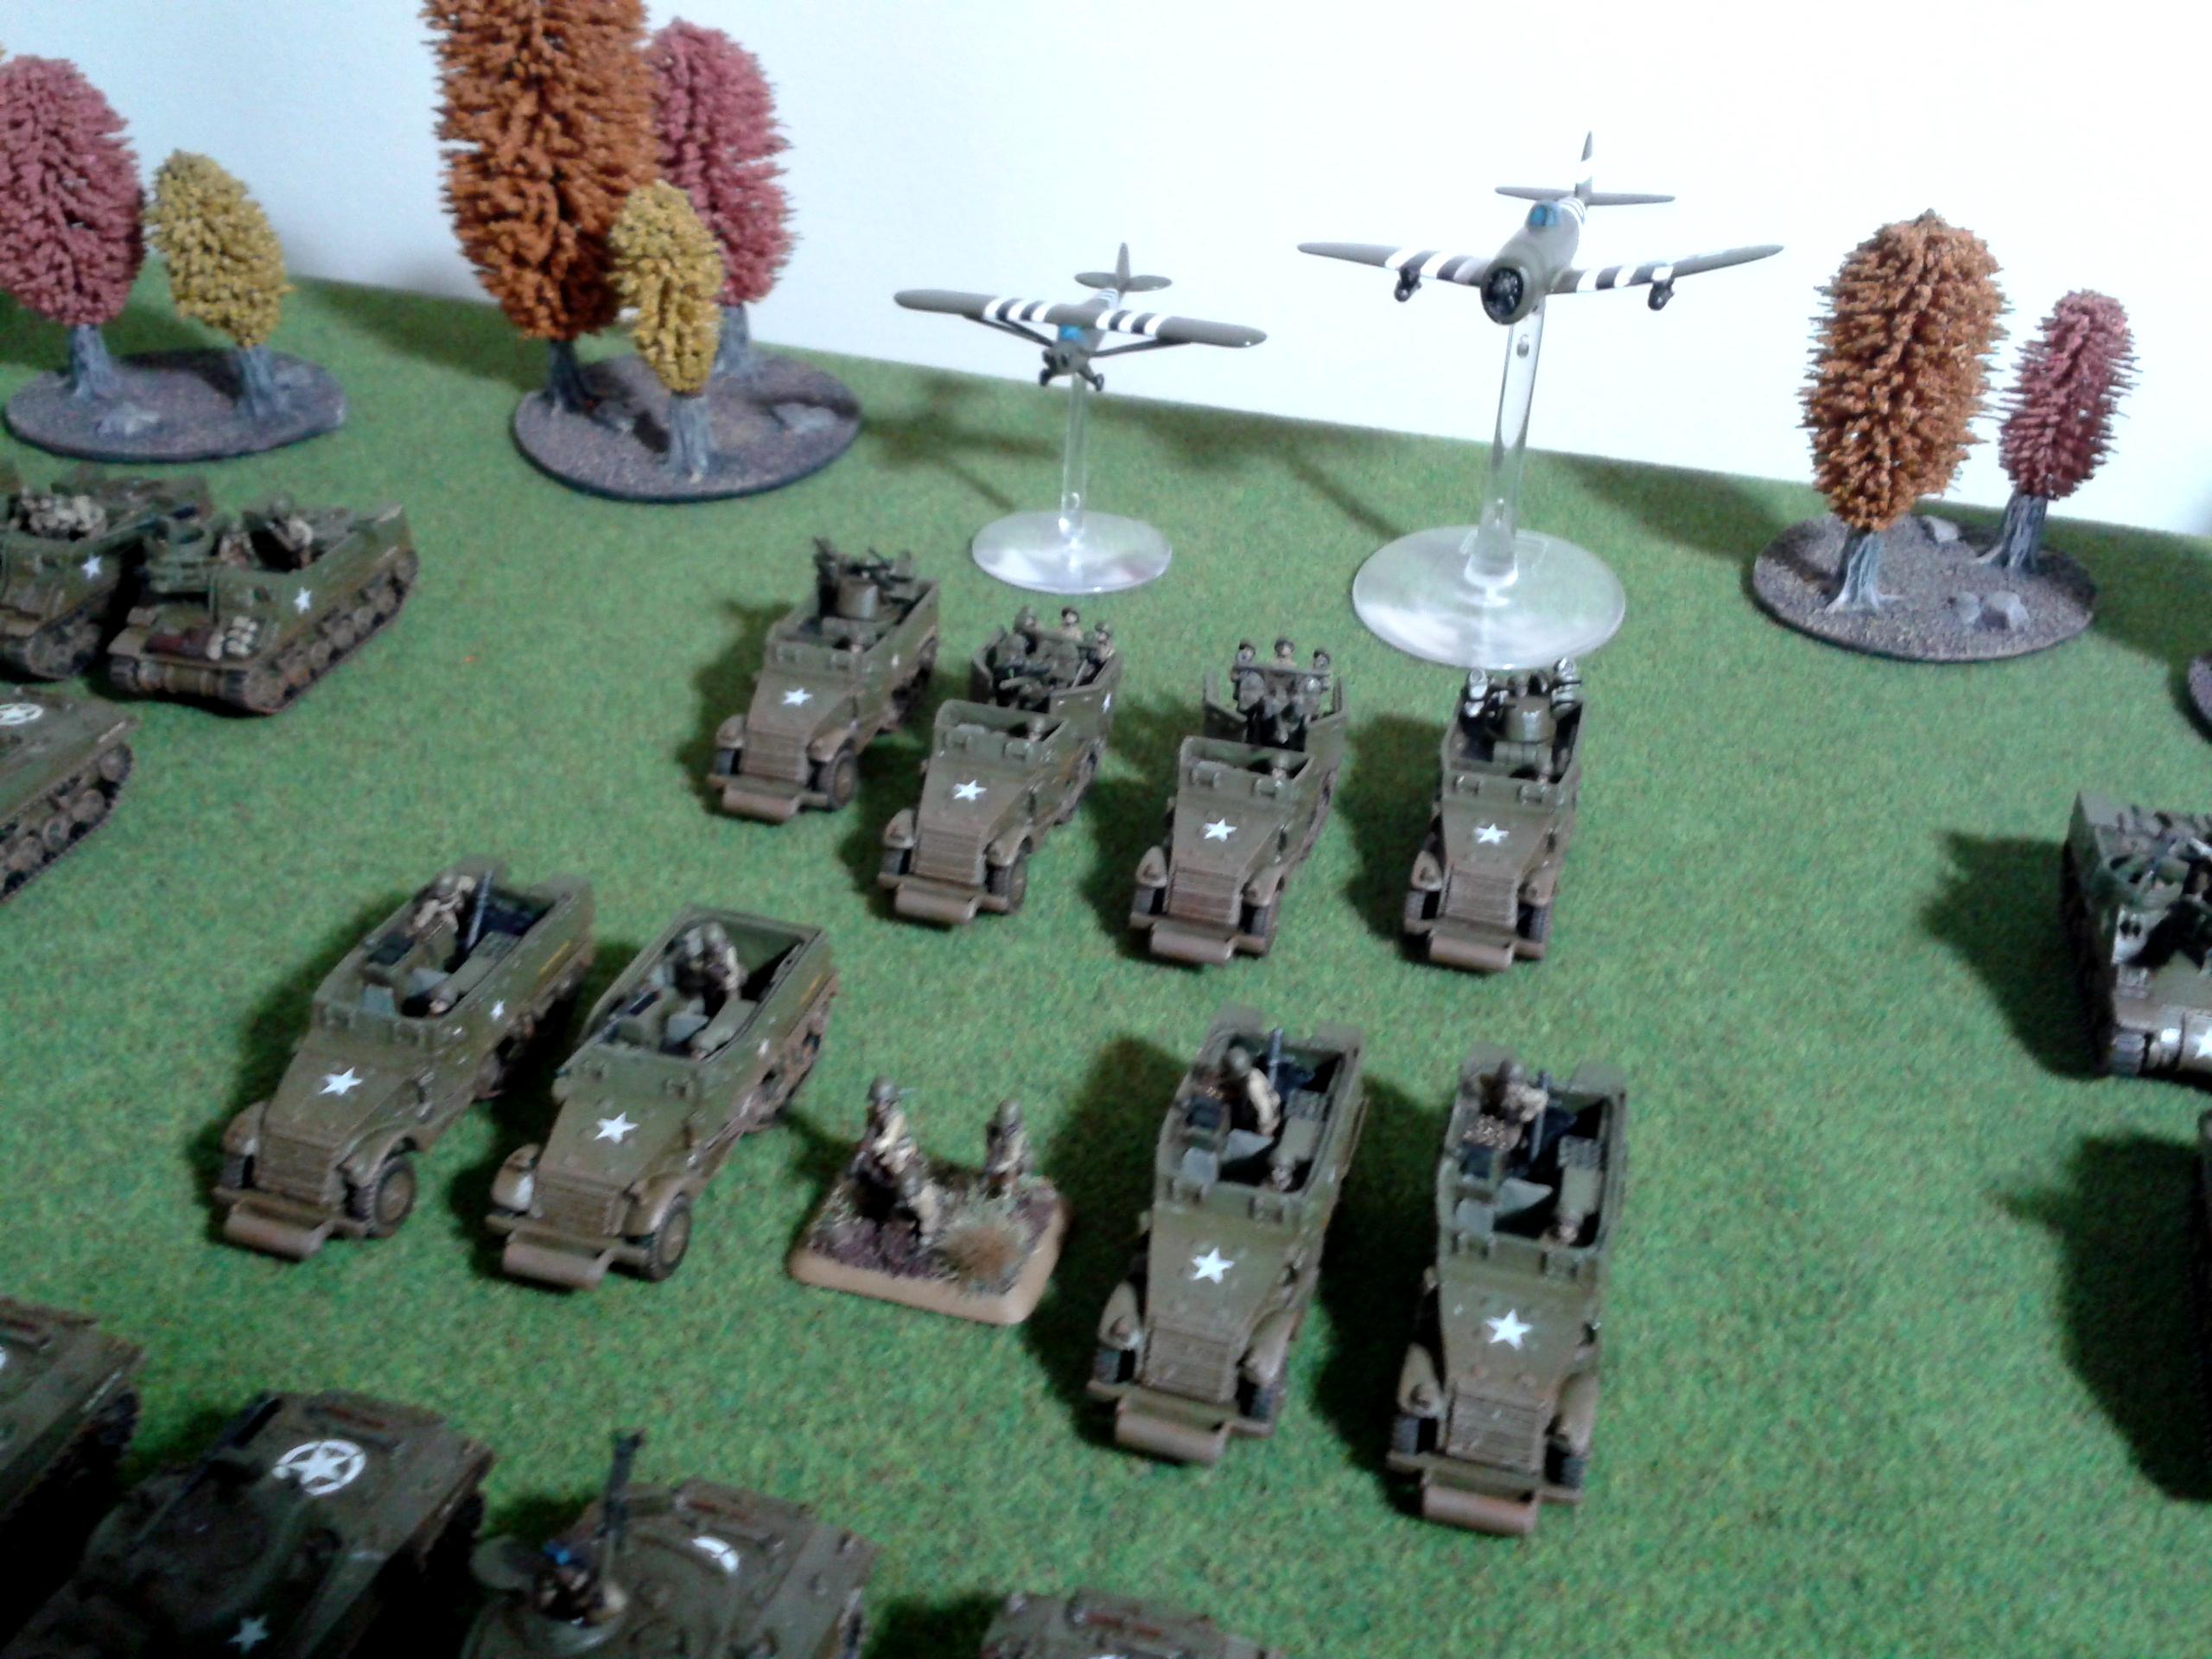 15mm, Flames Of War, Us Armored Division